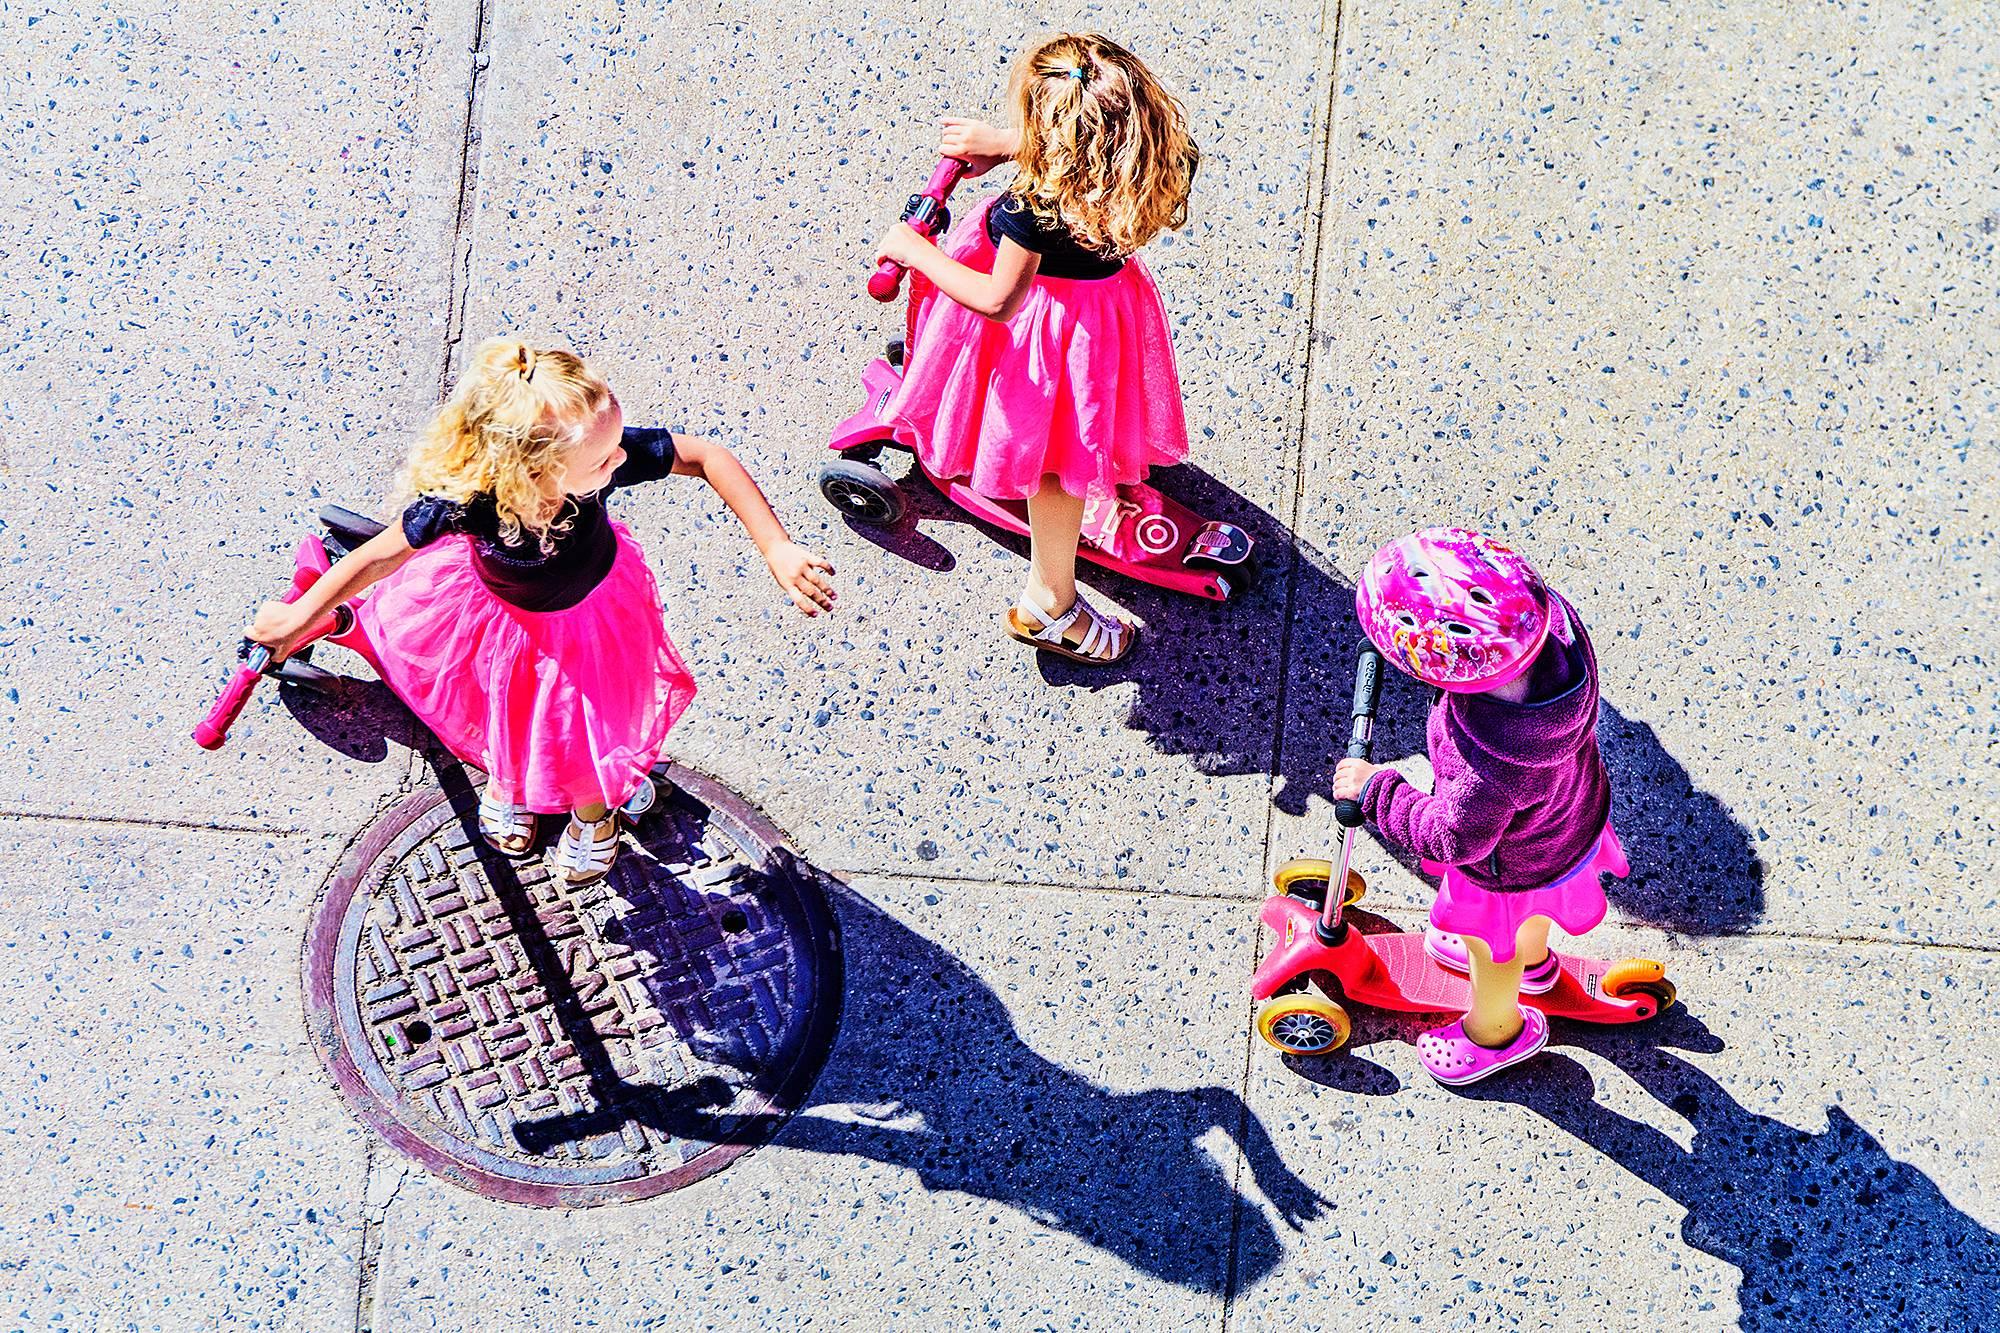 Mitchell Funk Abstract Photograph - Three Girls in Pink